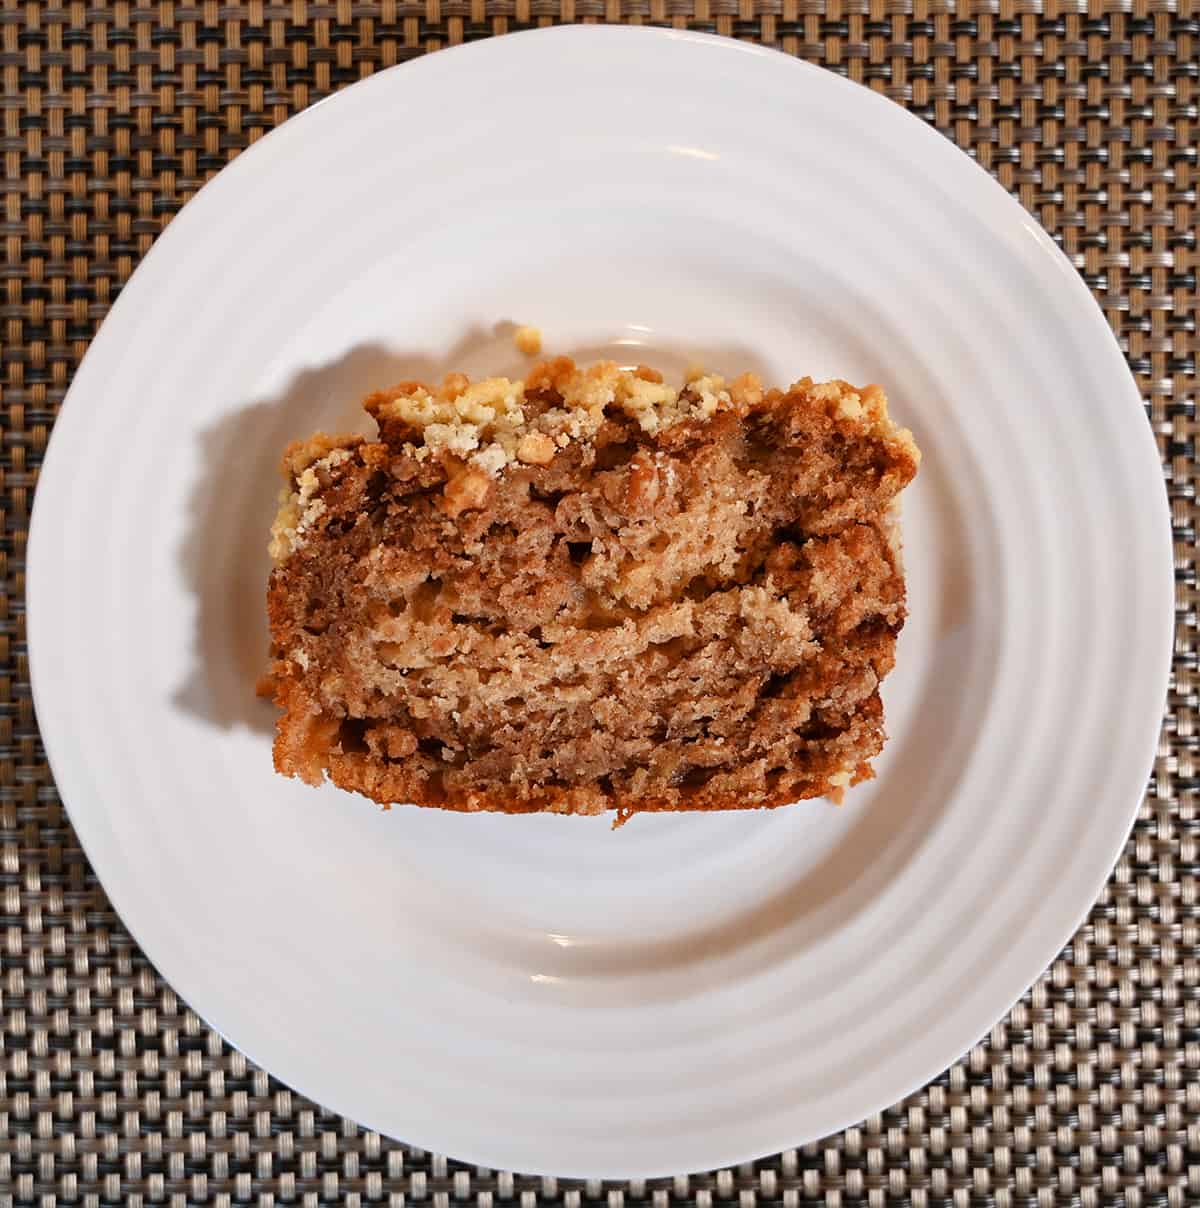 Top down image of  a slice of apple fritter loaf cake served on a white plate.